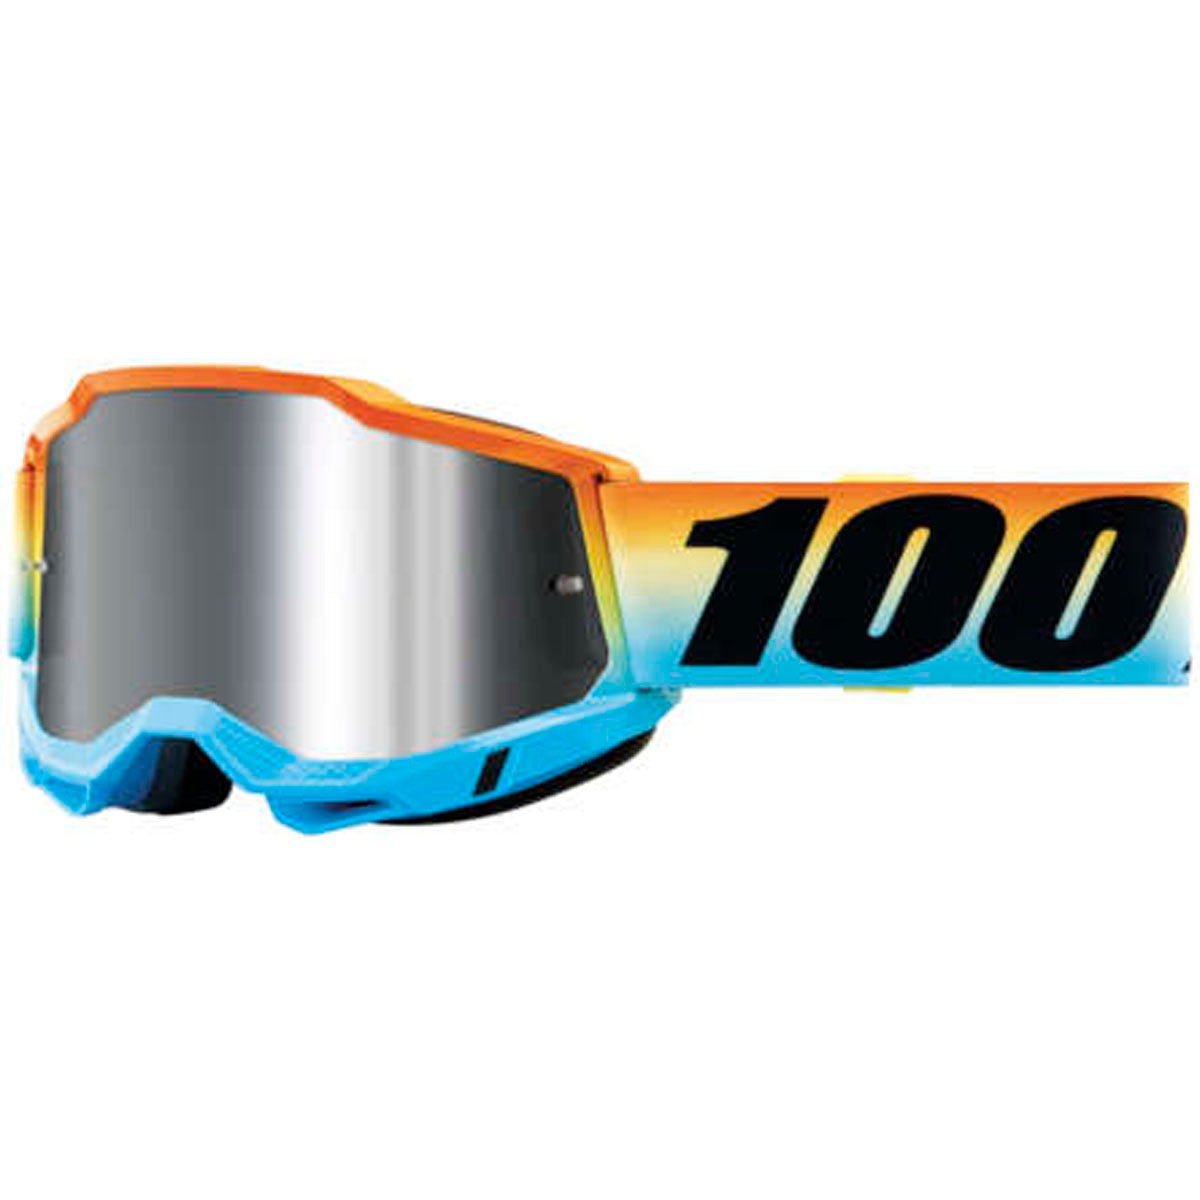 100% Accuri 2 Goggles Sunset / Flash Silver Mirrored Lens